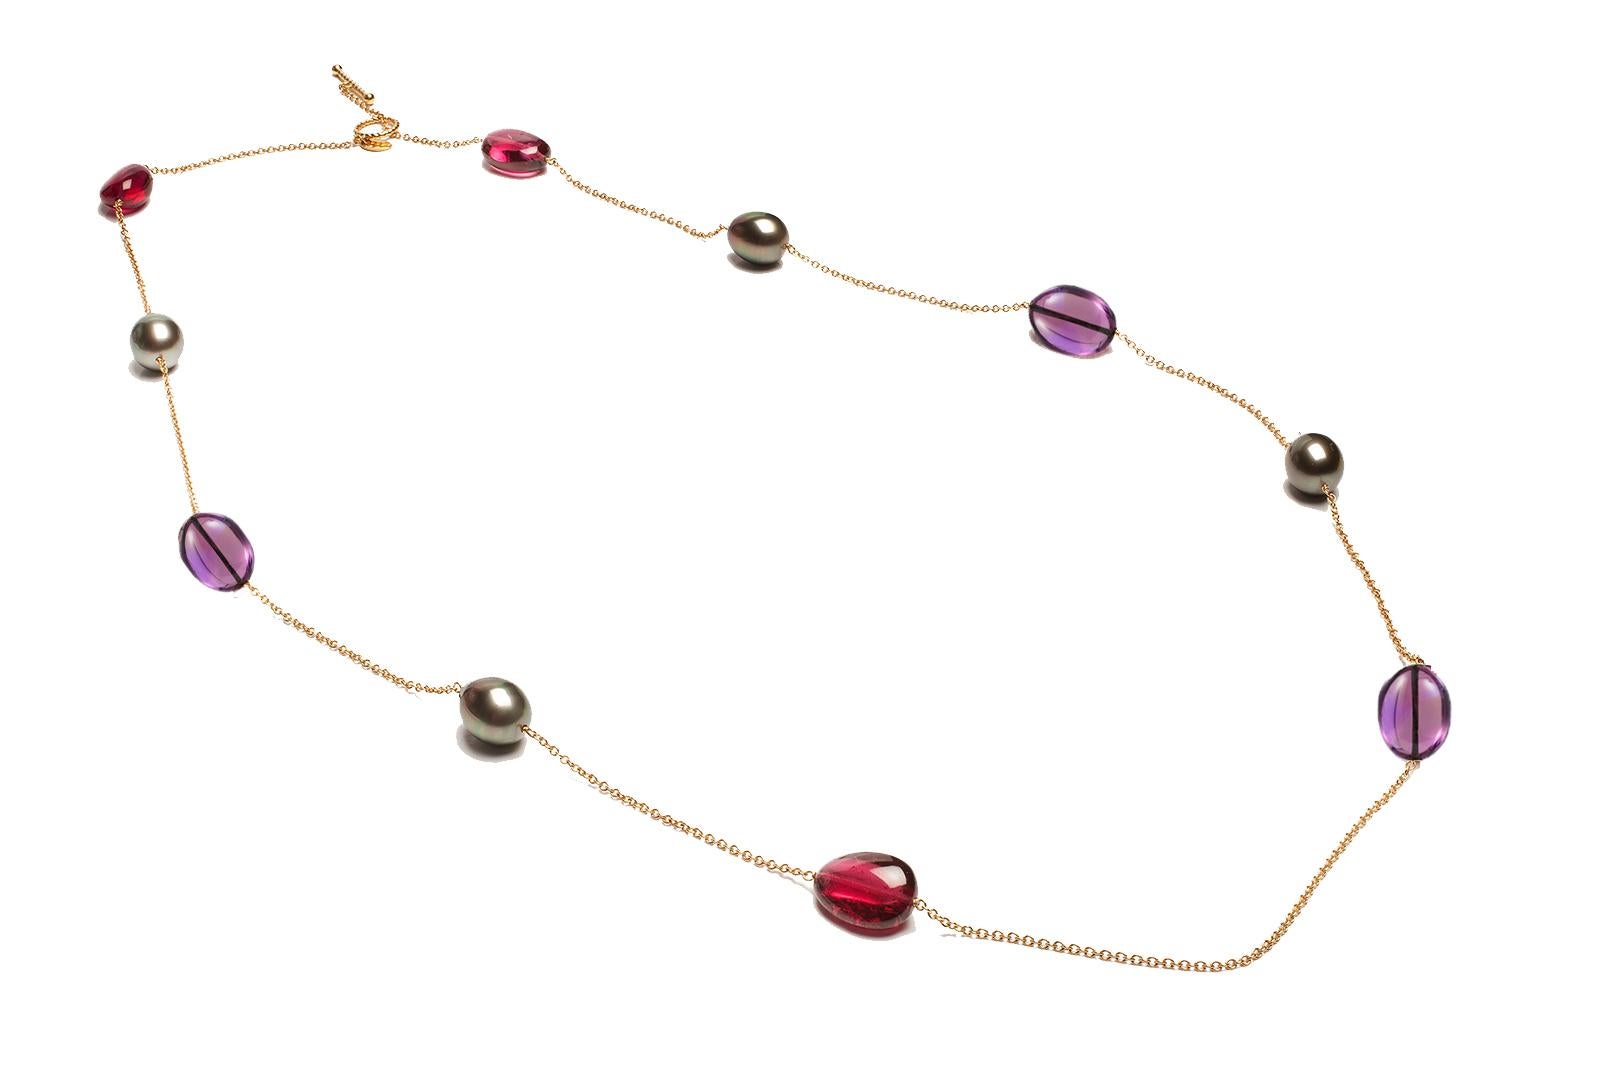 Beautiful Rubelite, Amethyst, Grey Tahitian Pearl Chain Necklace in 18K Yellow Gold, from 'Freedom' Collection. This collection is comprised of loose colored gemstones in two beautifully shaped silhouettes, teardrops and ovals enveloped by cages and